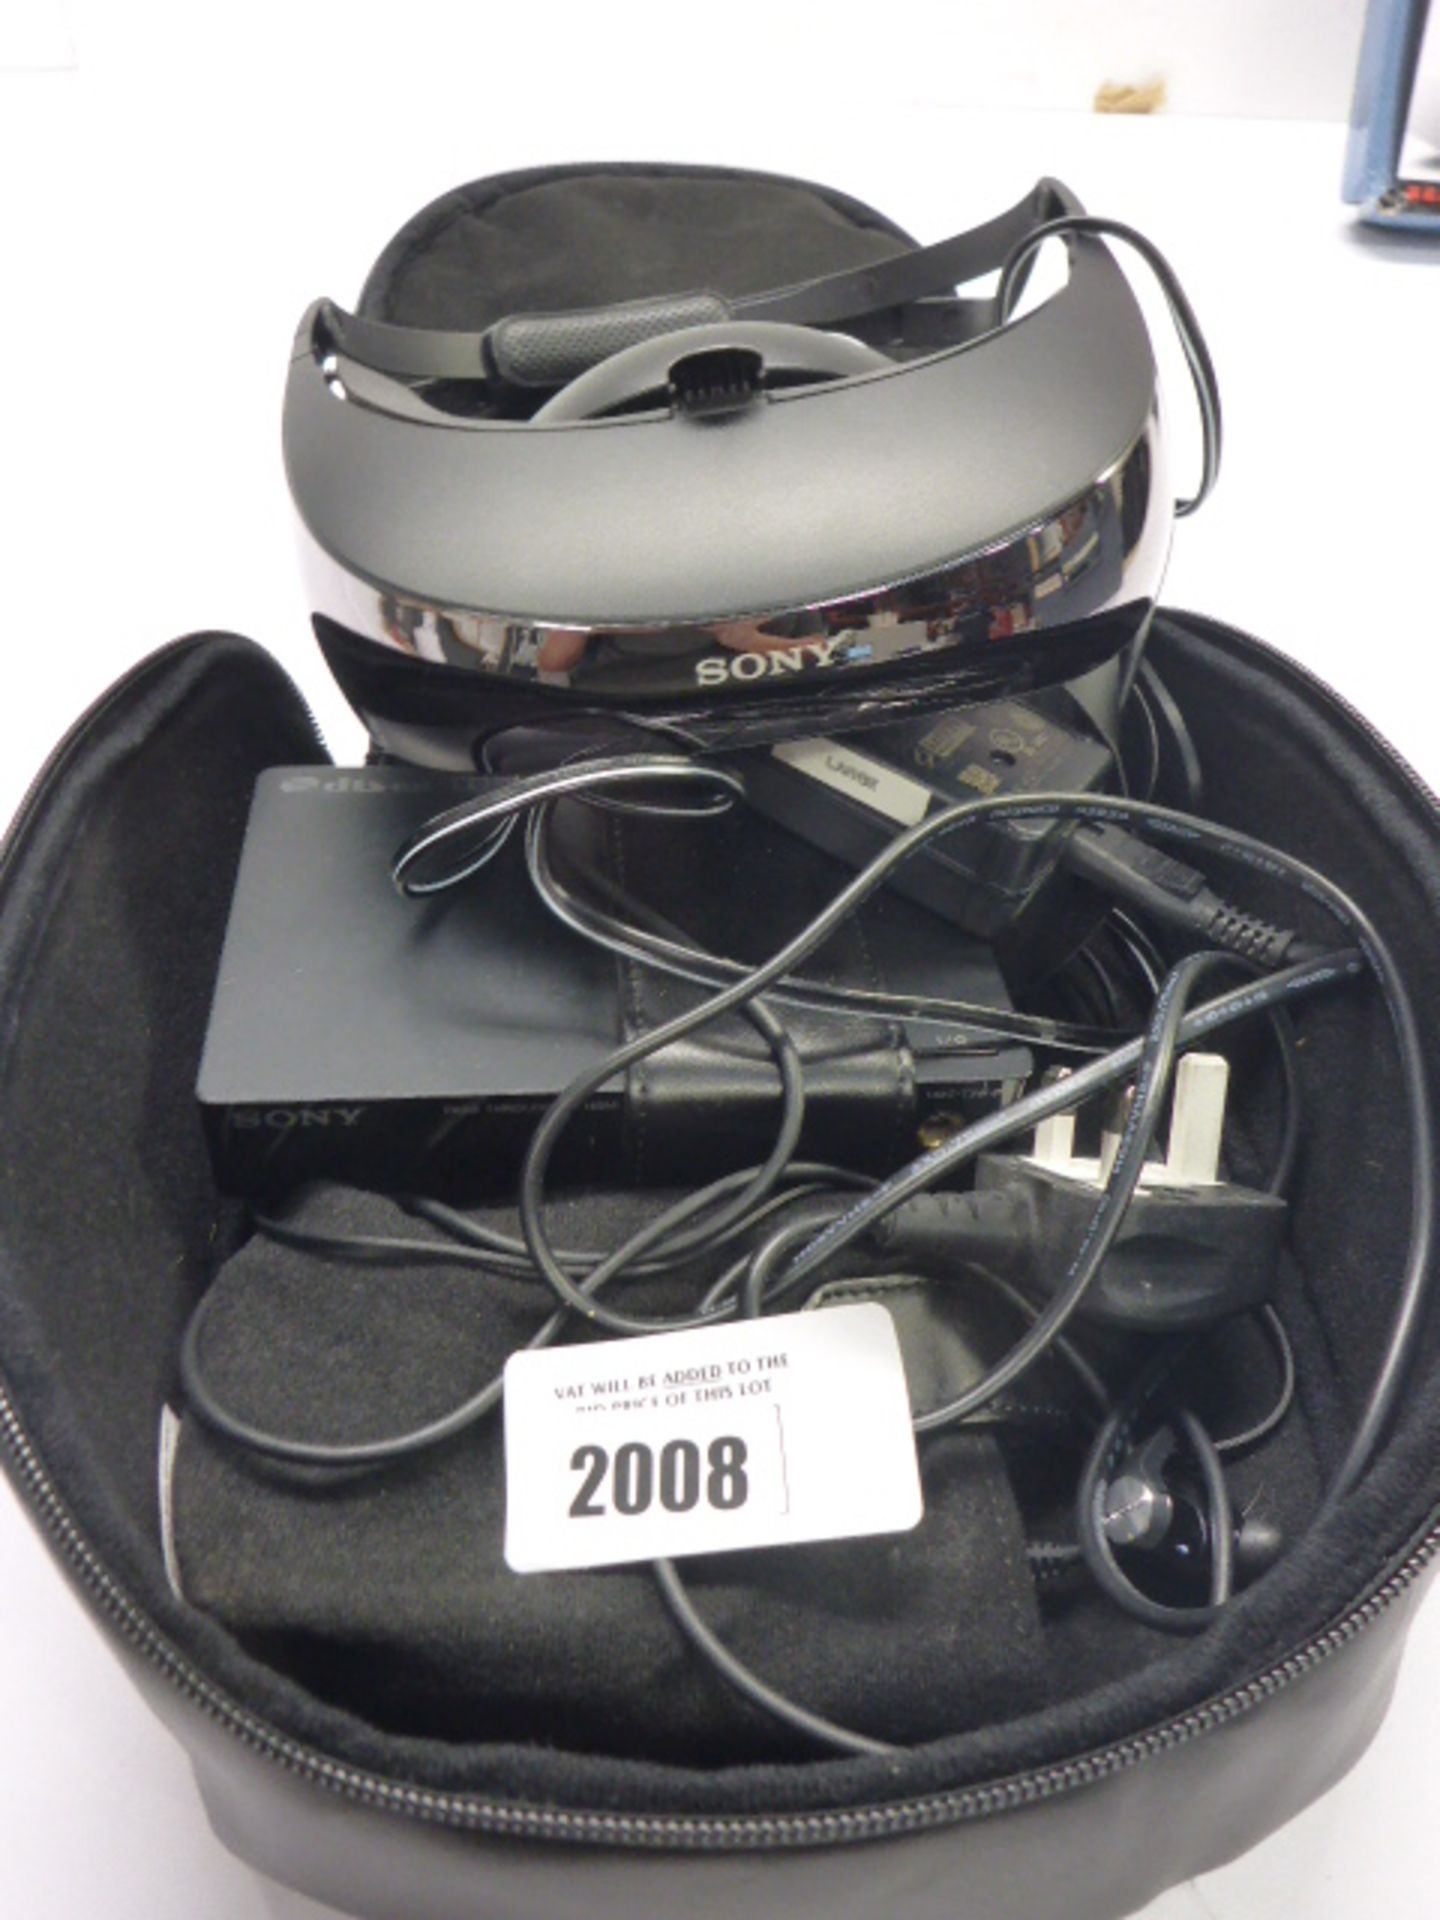 Sony HMZ-T3W 3D Viewer with case